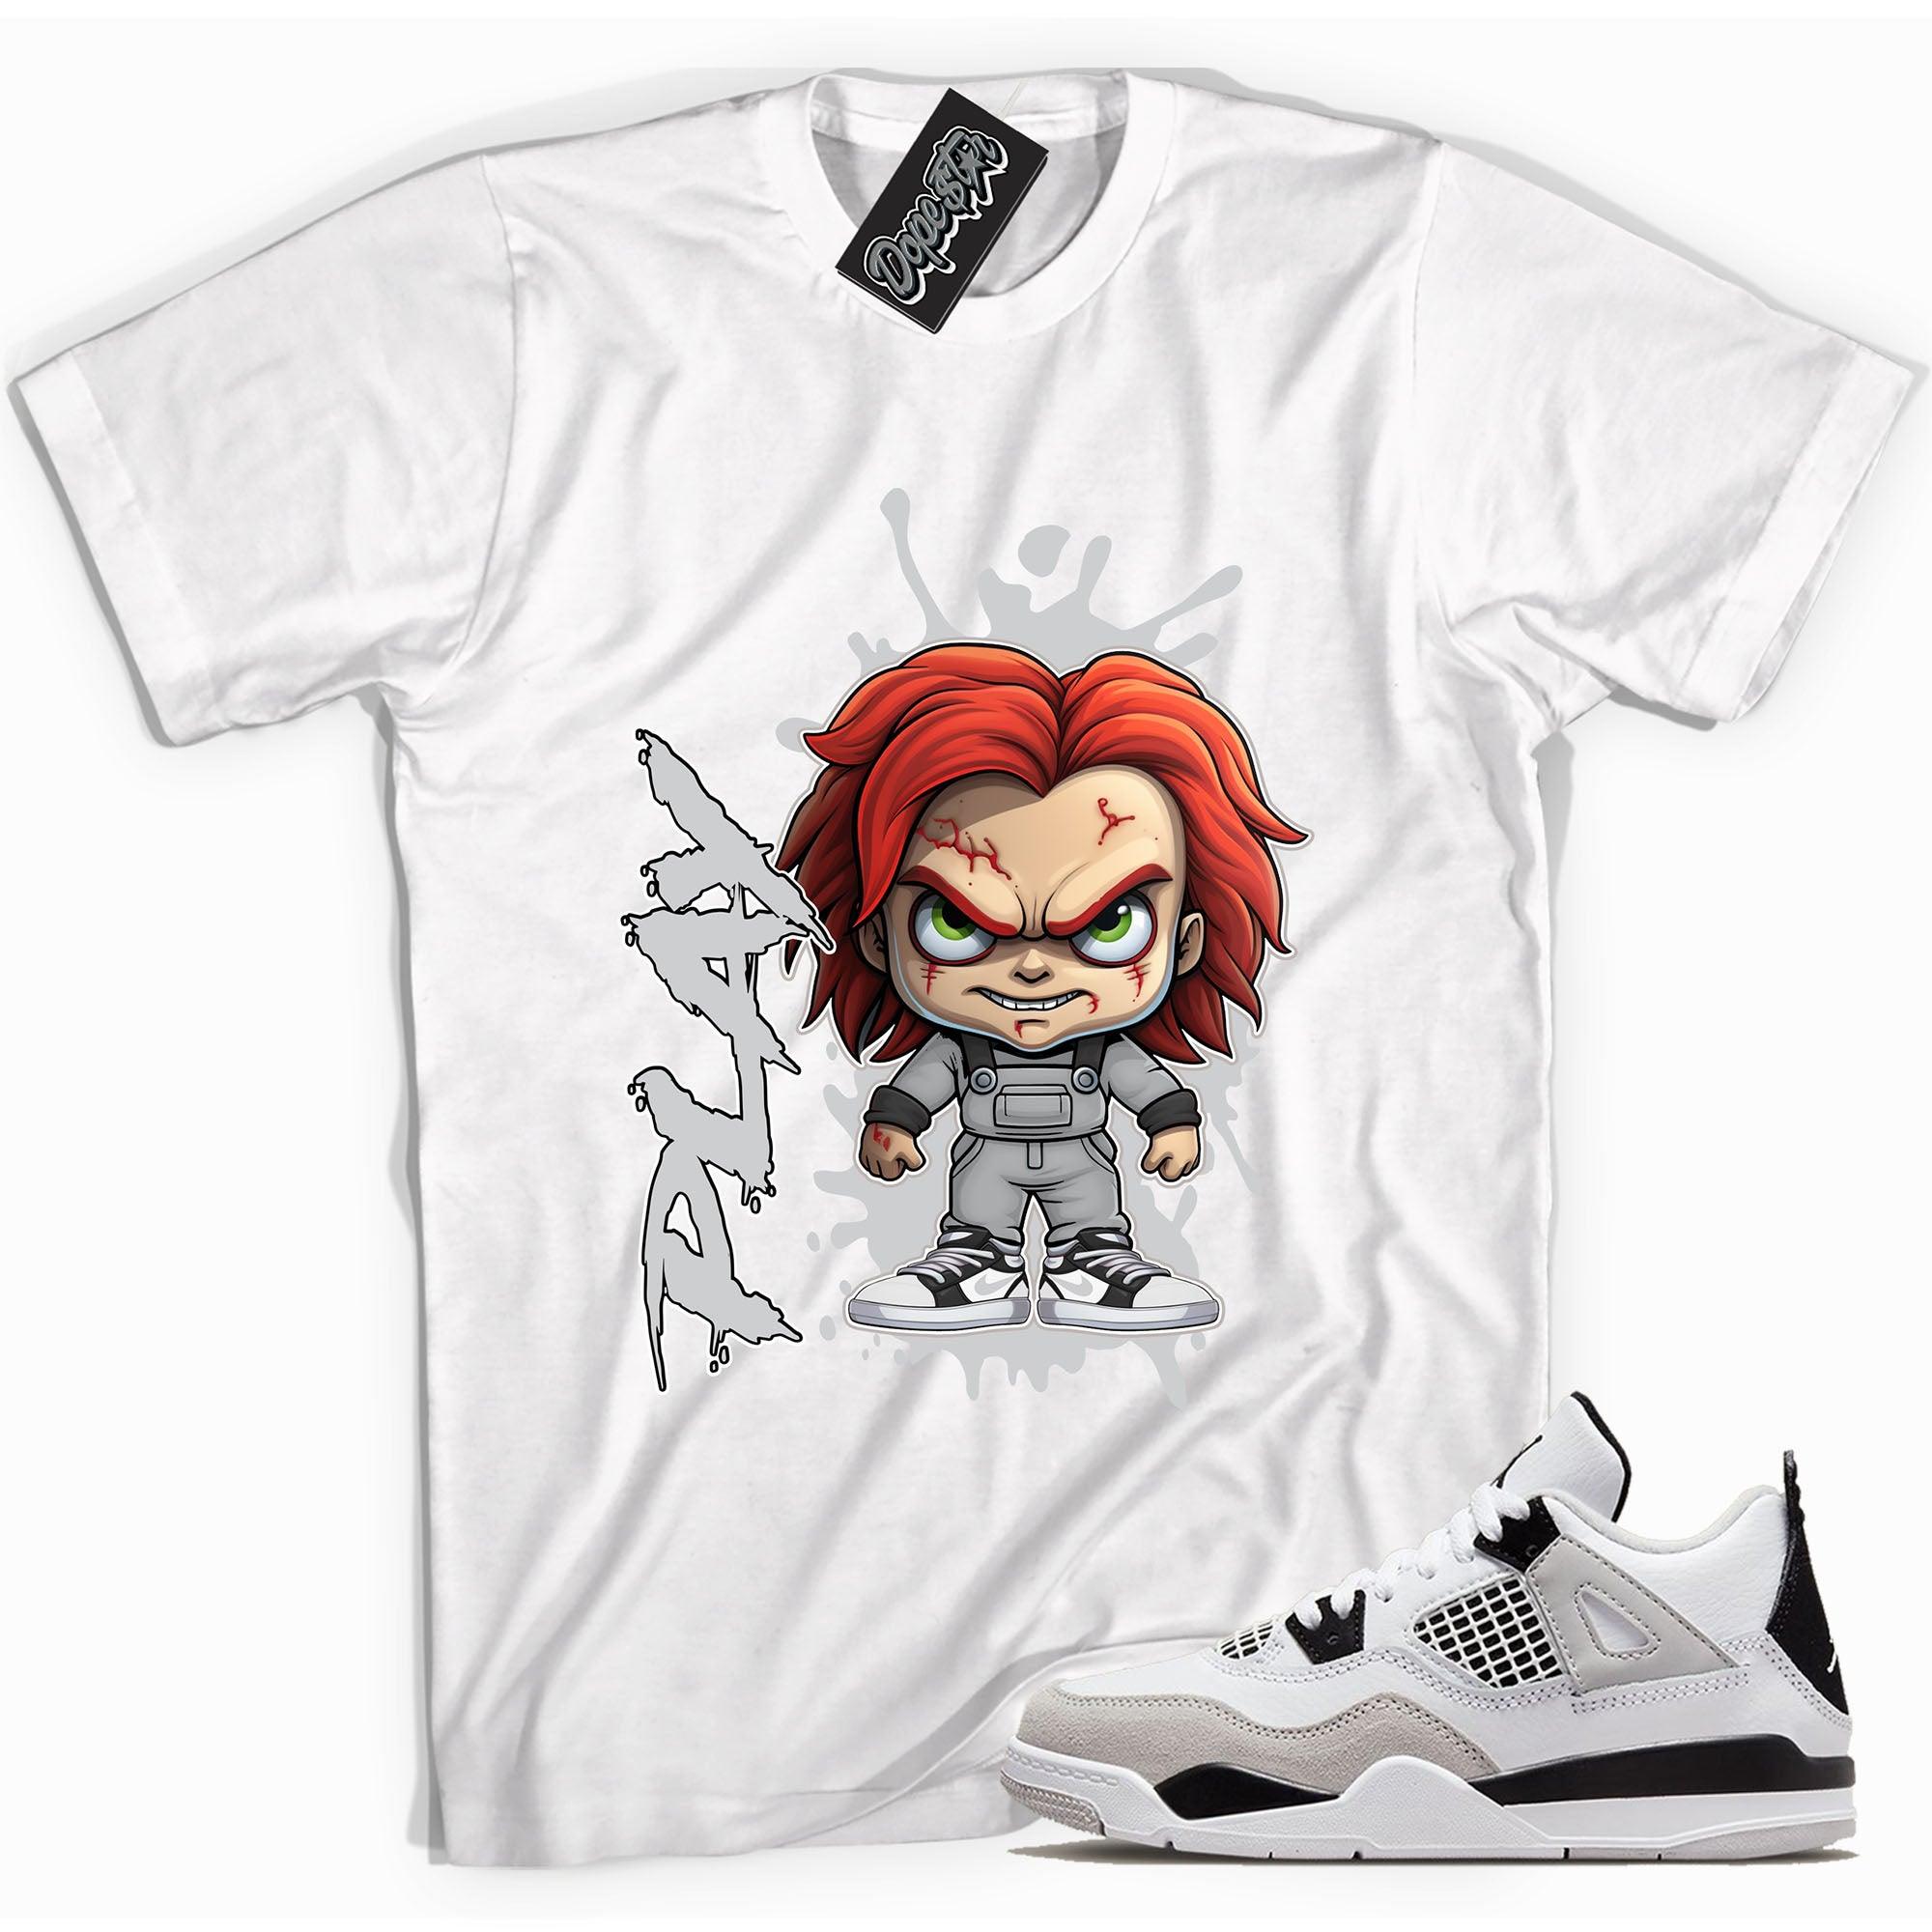 Cool White Shirt With Chucky Play design That Perfectly Matches AIR JORDAN 4 RETRO MILITARY BLACK Sneakers.